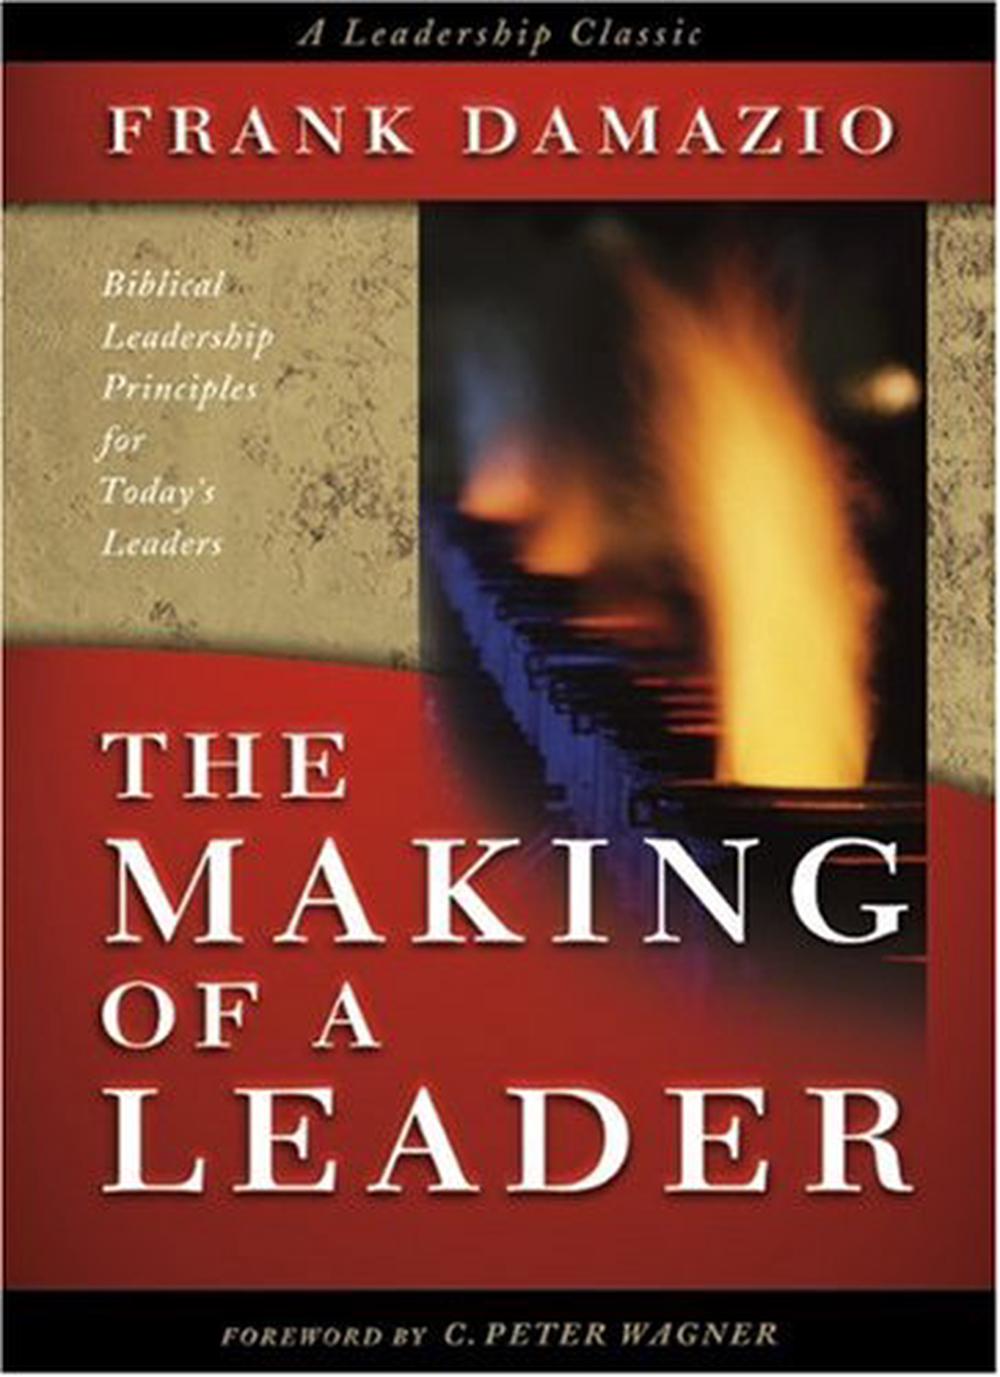 The Making of a Leader by Frank Damazio (English) Paperback Book Free Shipping! 9780914936848 eBay